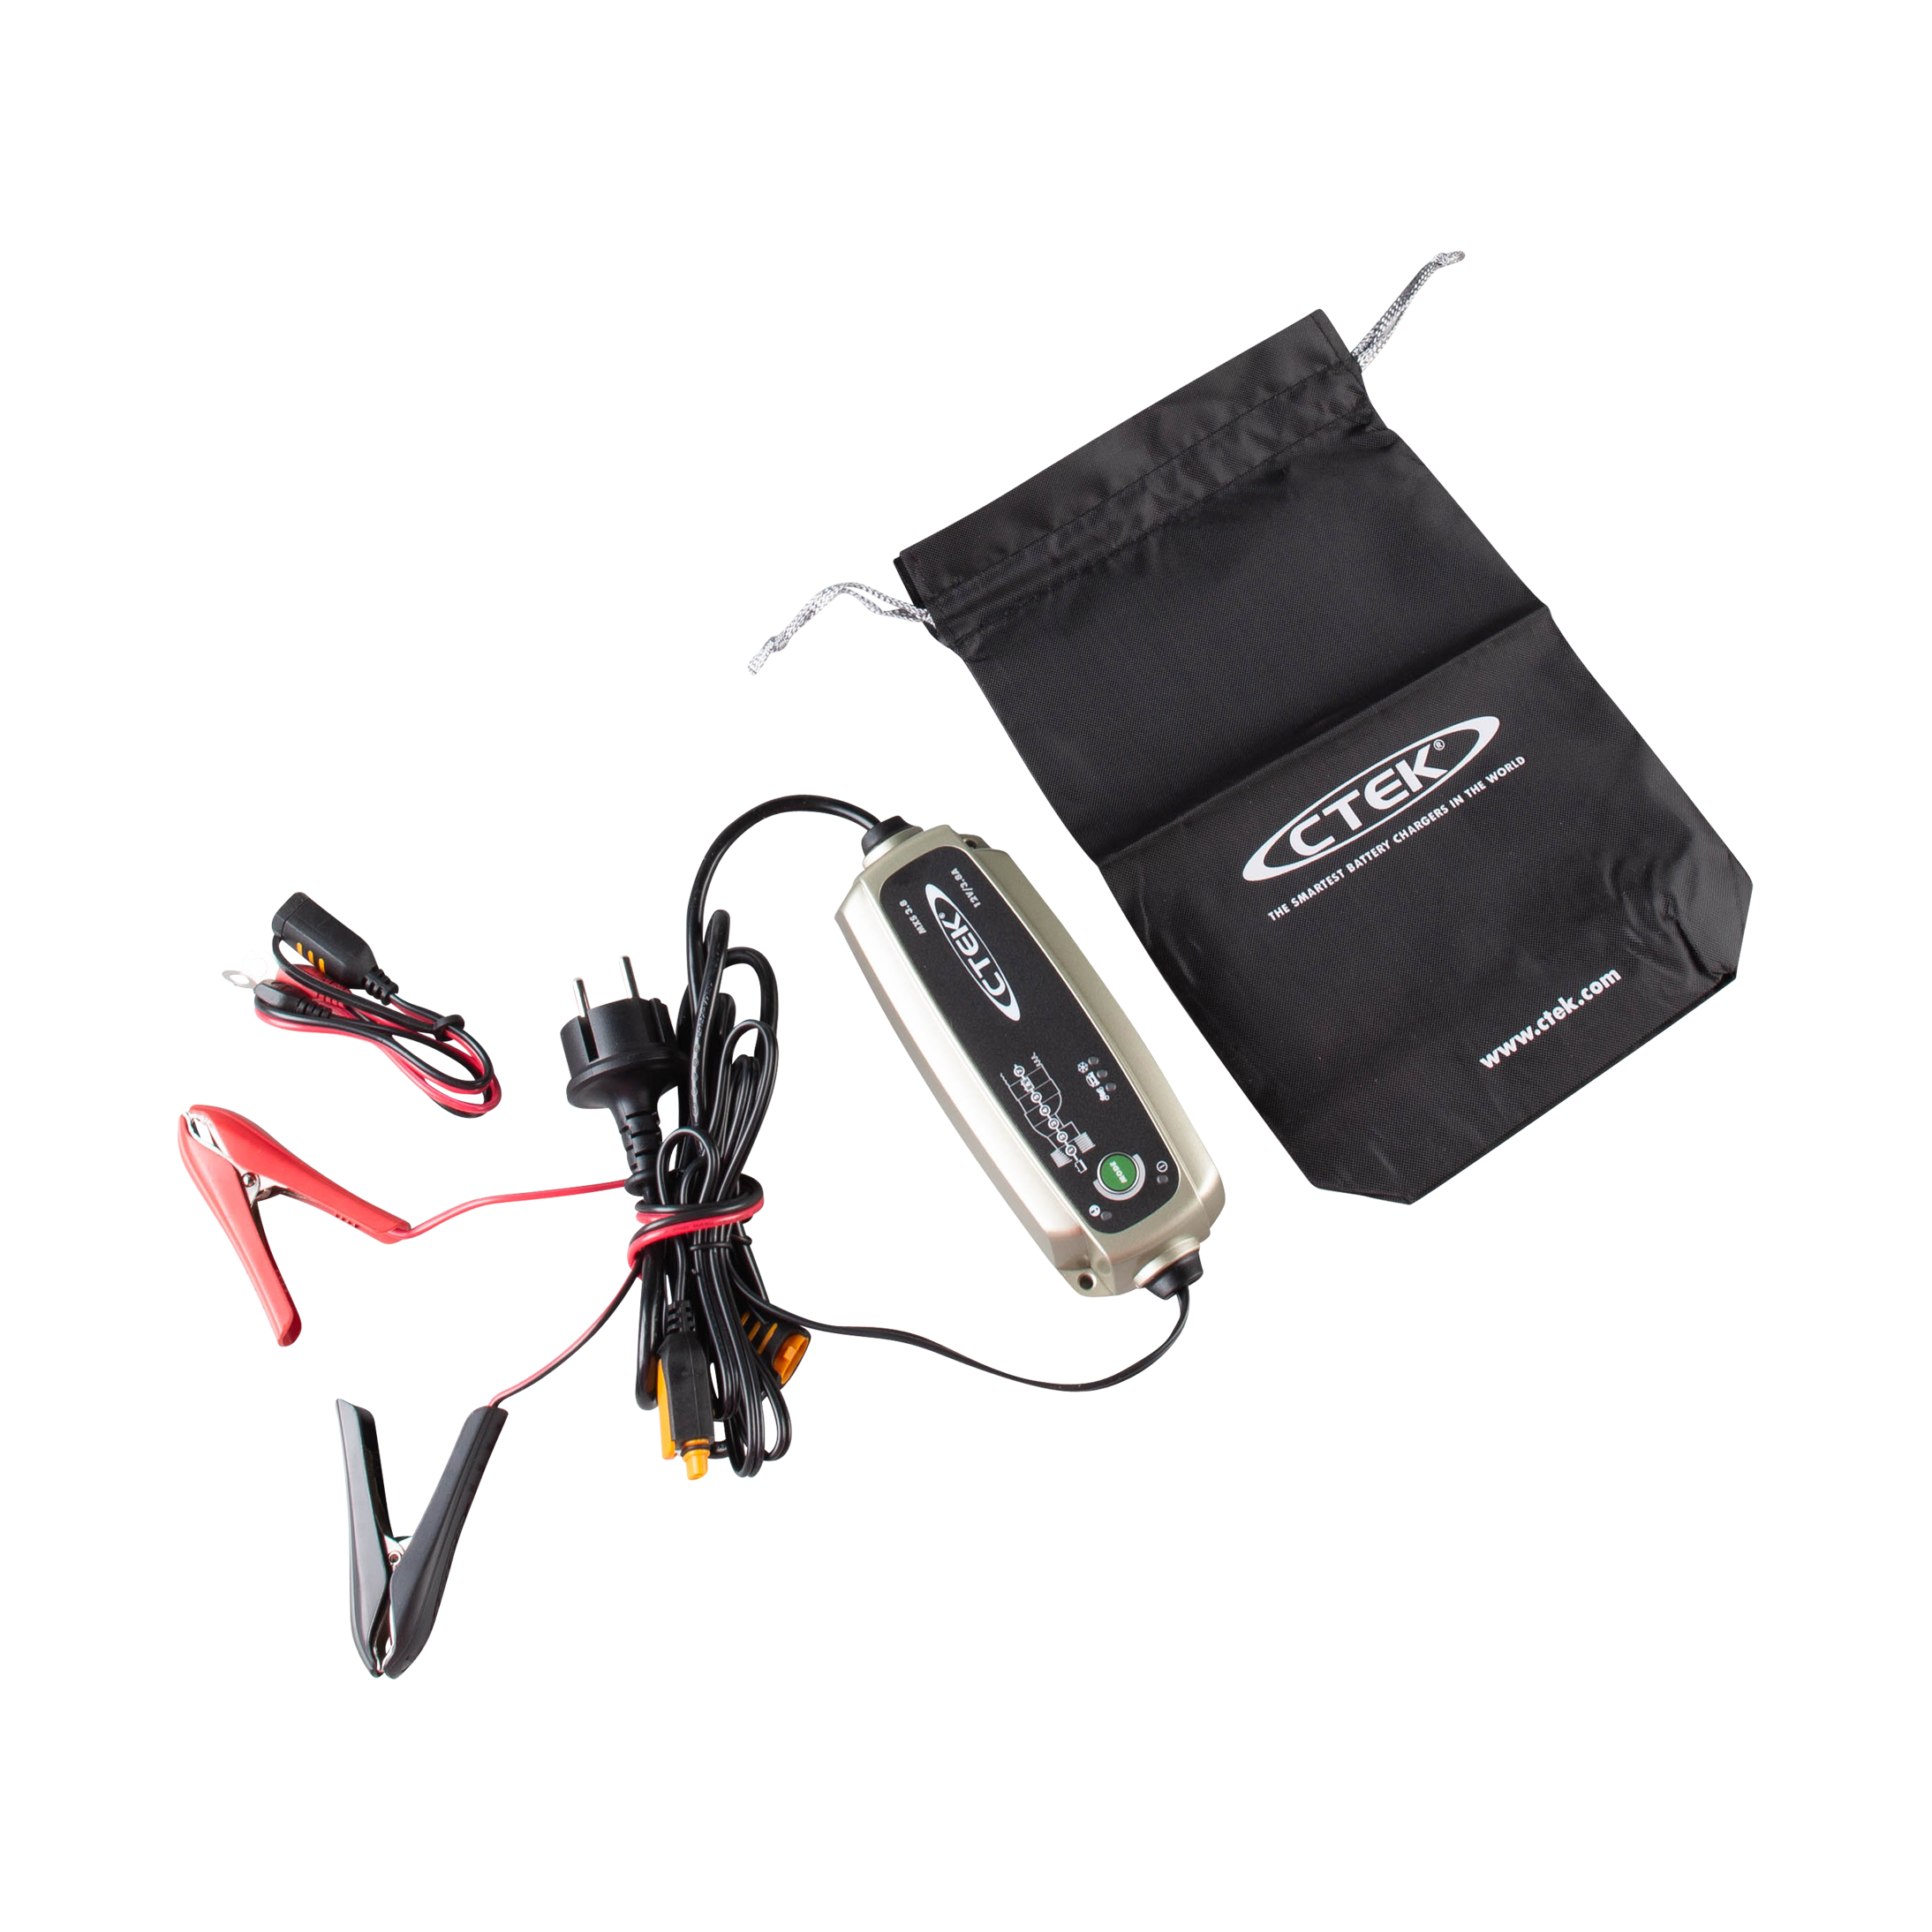 CTEK MXS 3.8 Battery Charger - Lowest Price Guarantee